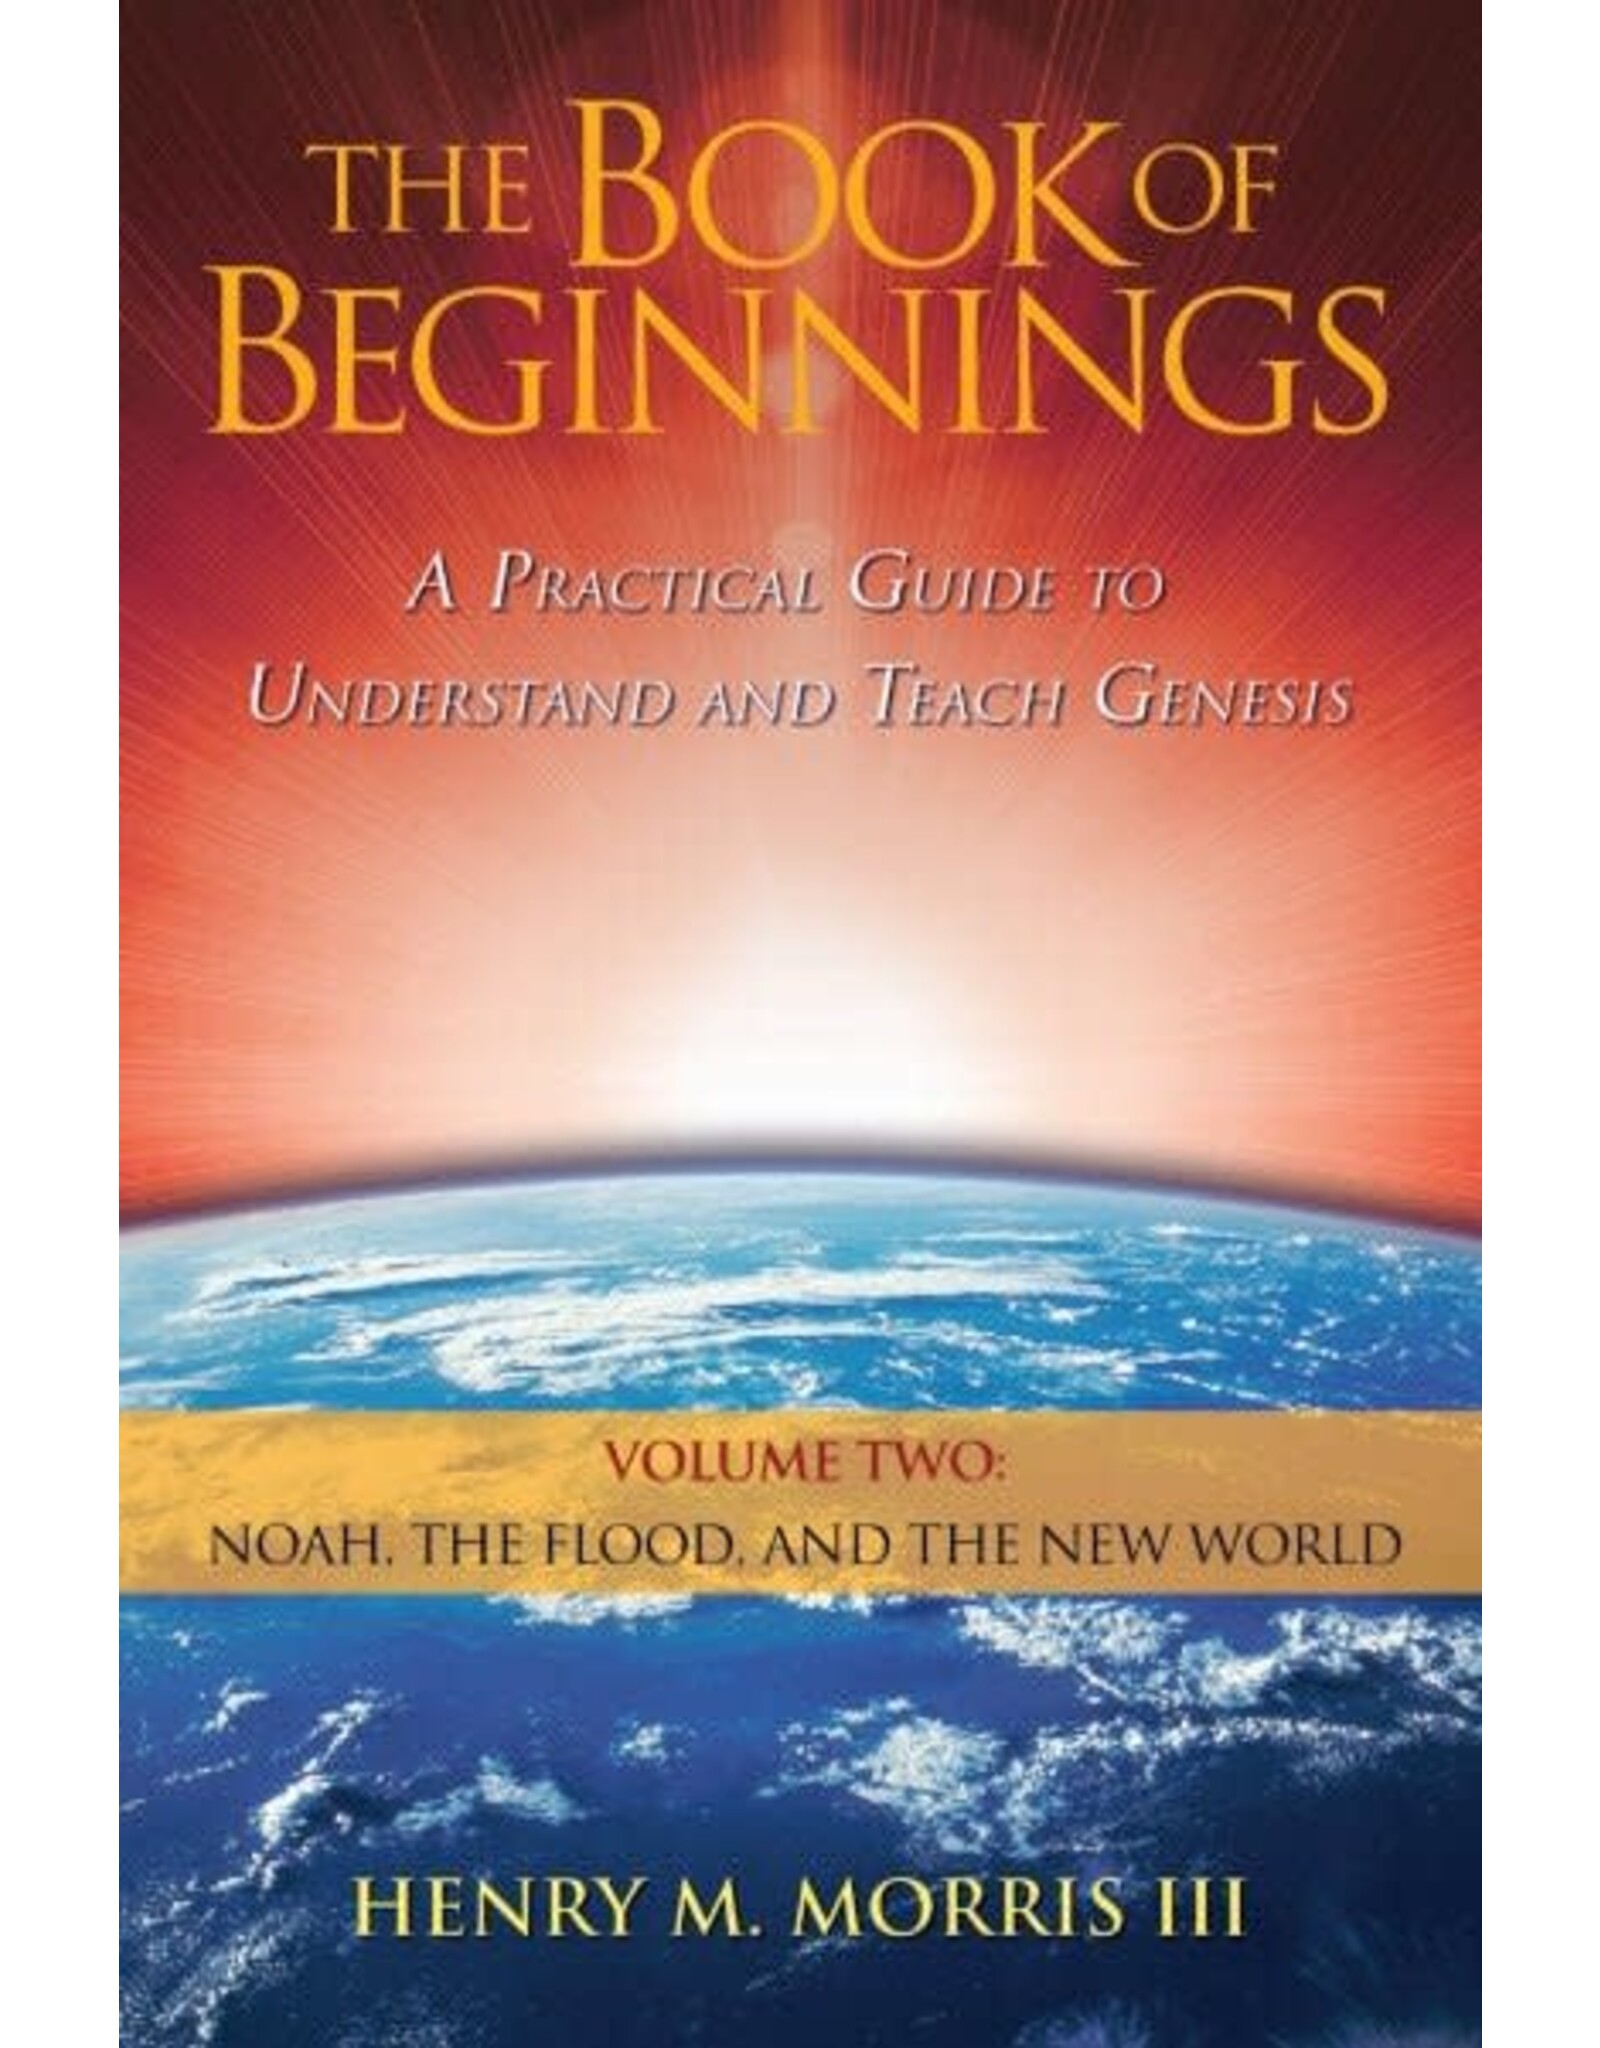 ICR The Book of Beginnings: A Practical Guide to Understand and Teach Genesis (Volume 2: Noah, the Flood, and the New World)